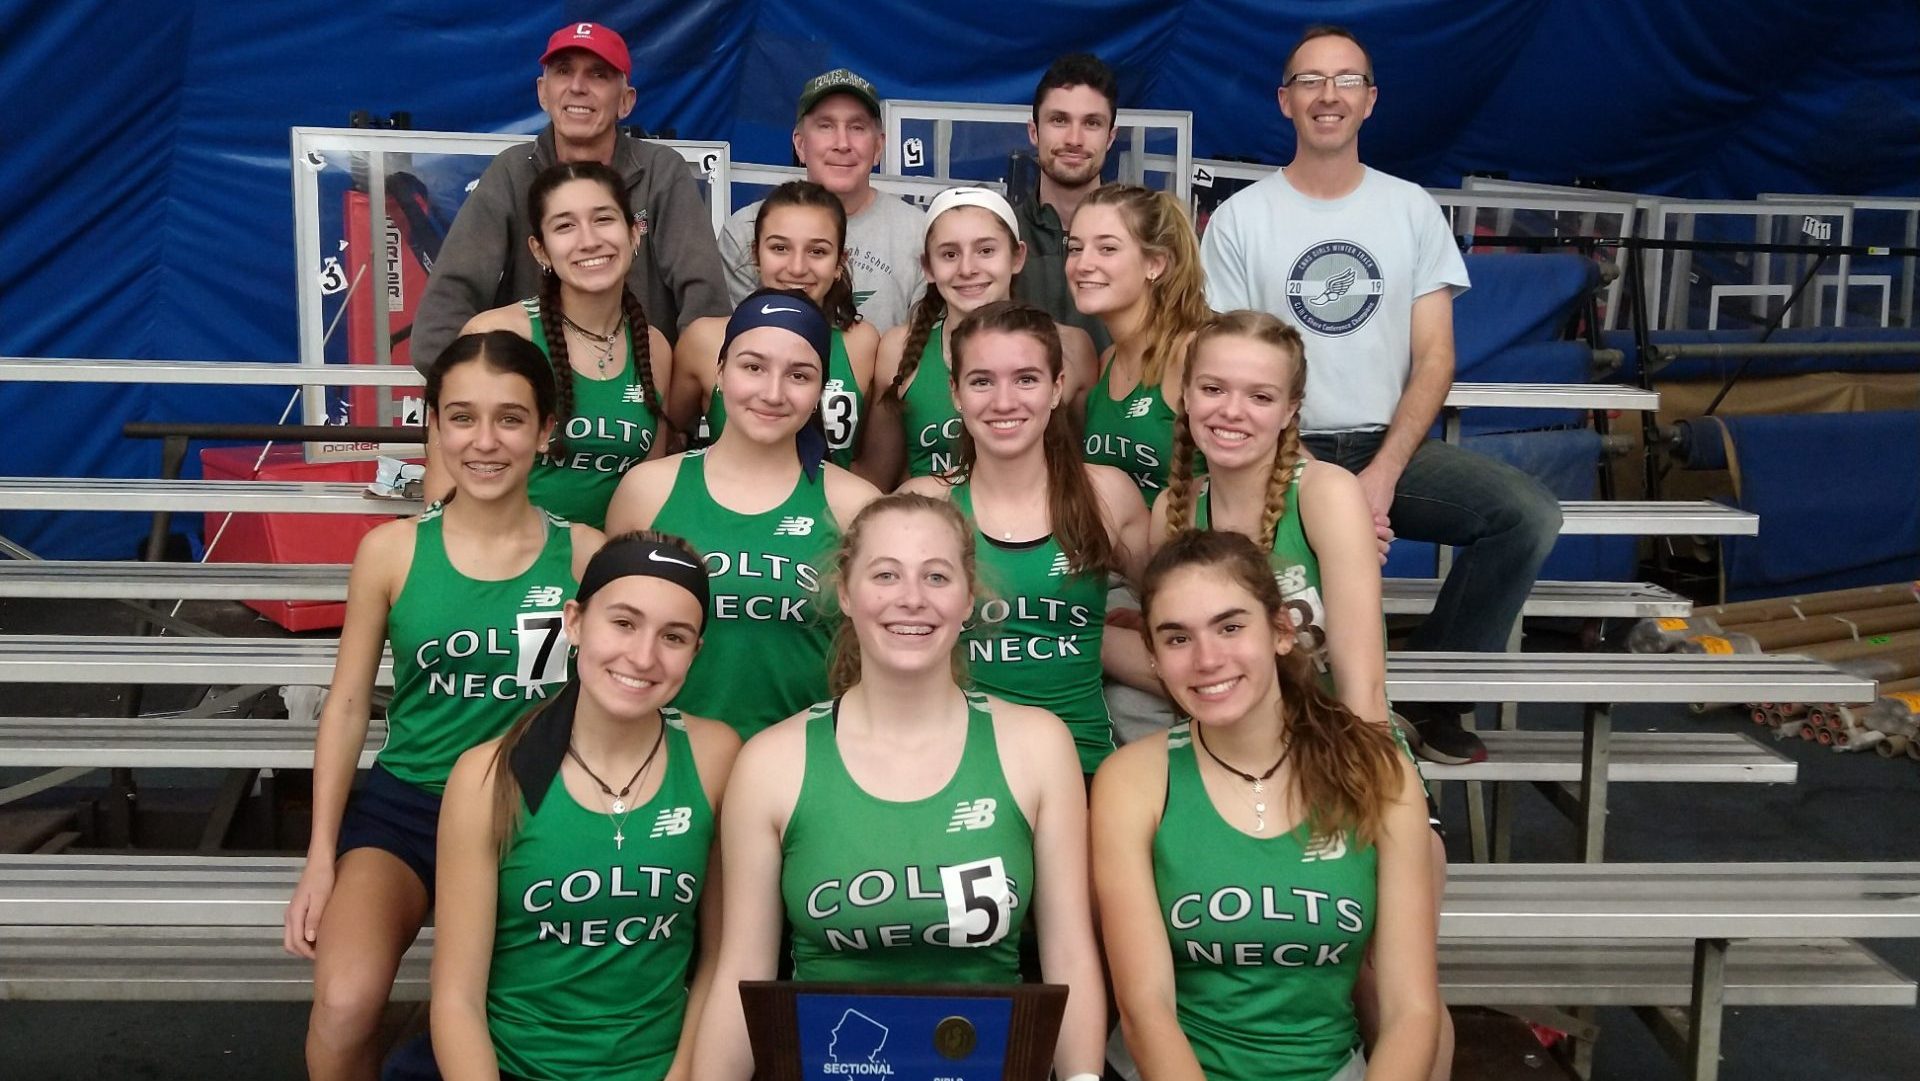 Colts Neck athletes showing dominating talents on and track and field - BVM  Sports